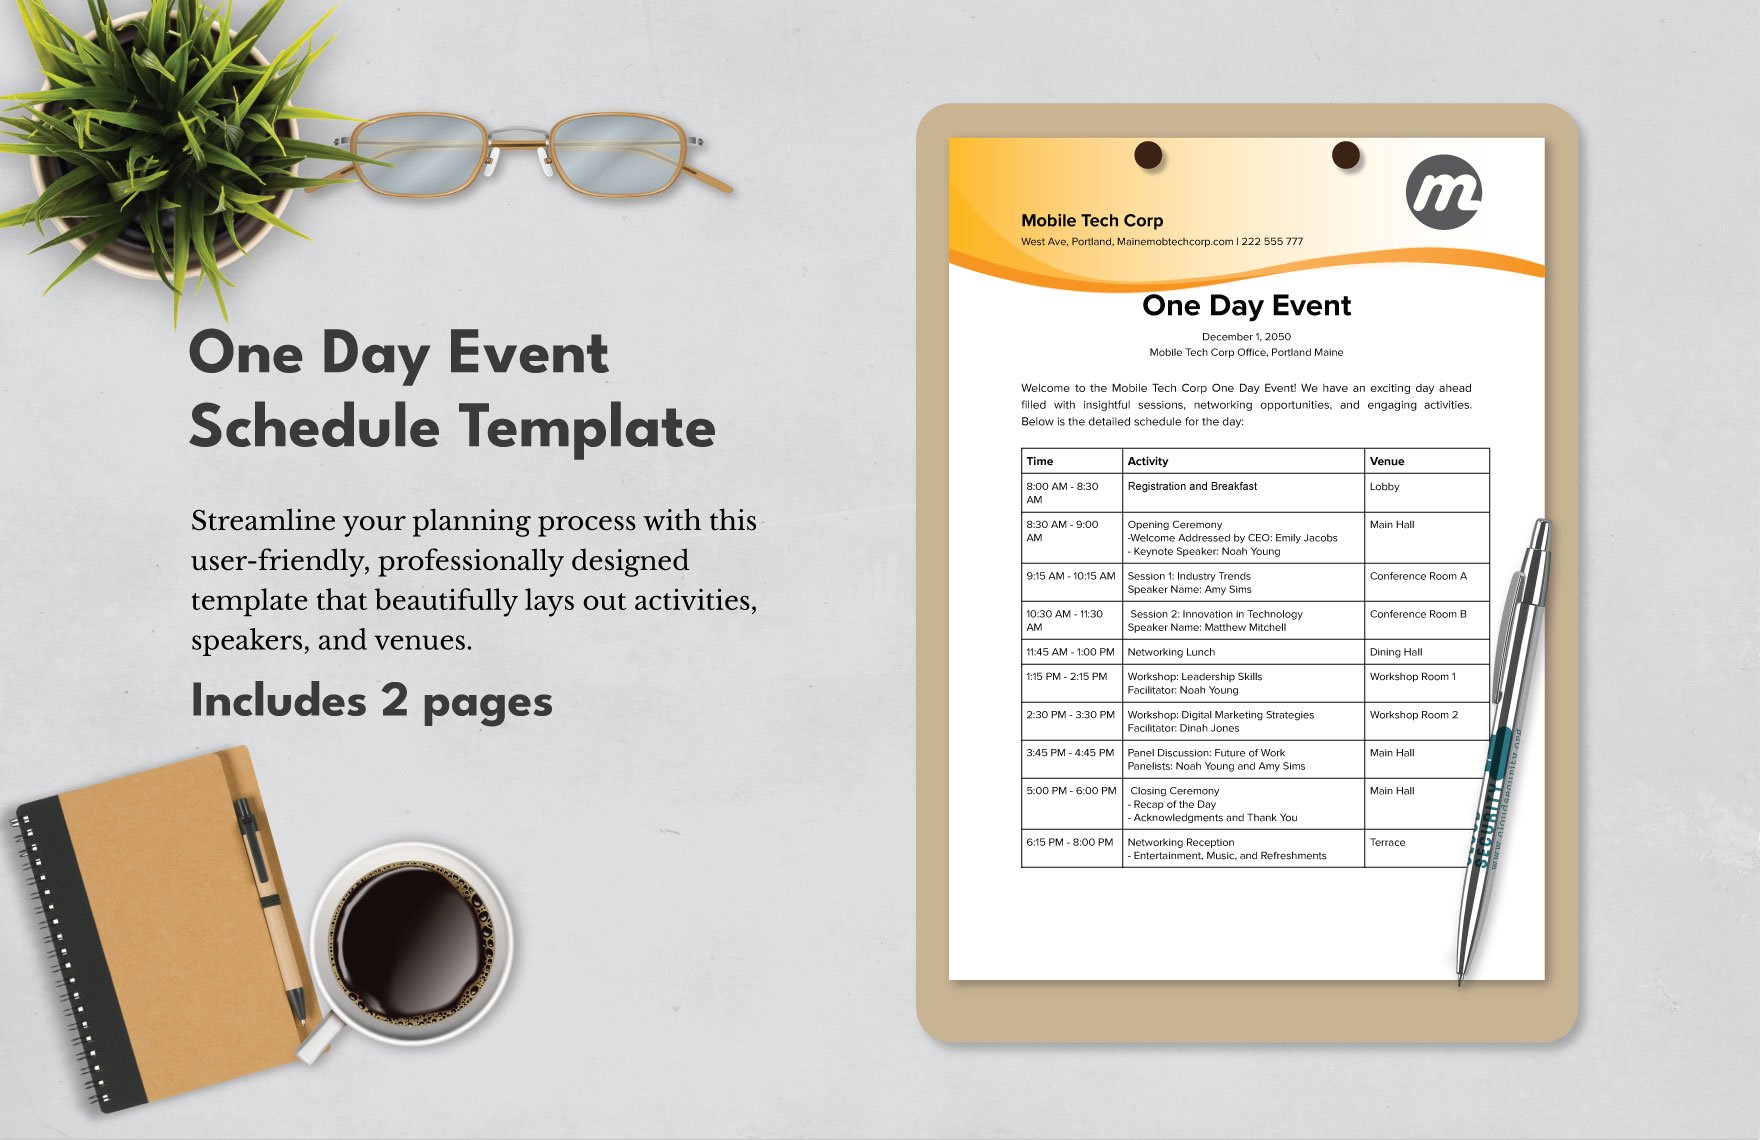 One Day Event Schedule Template